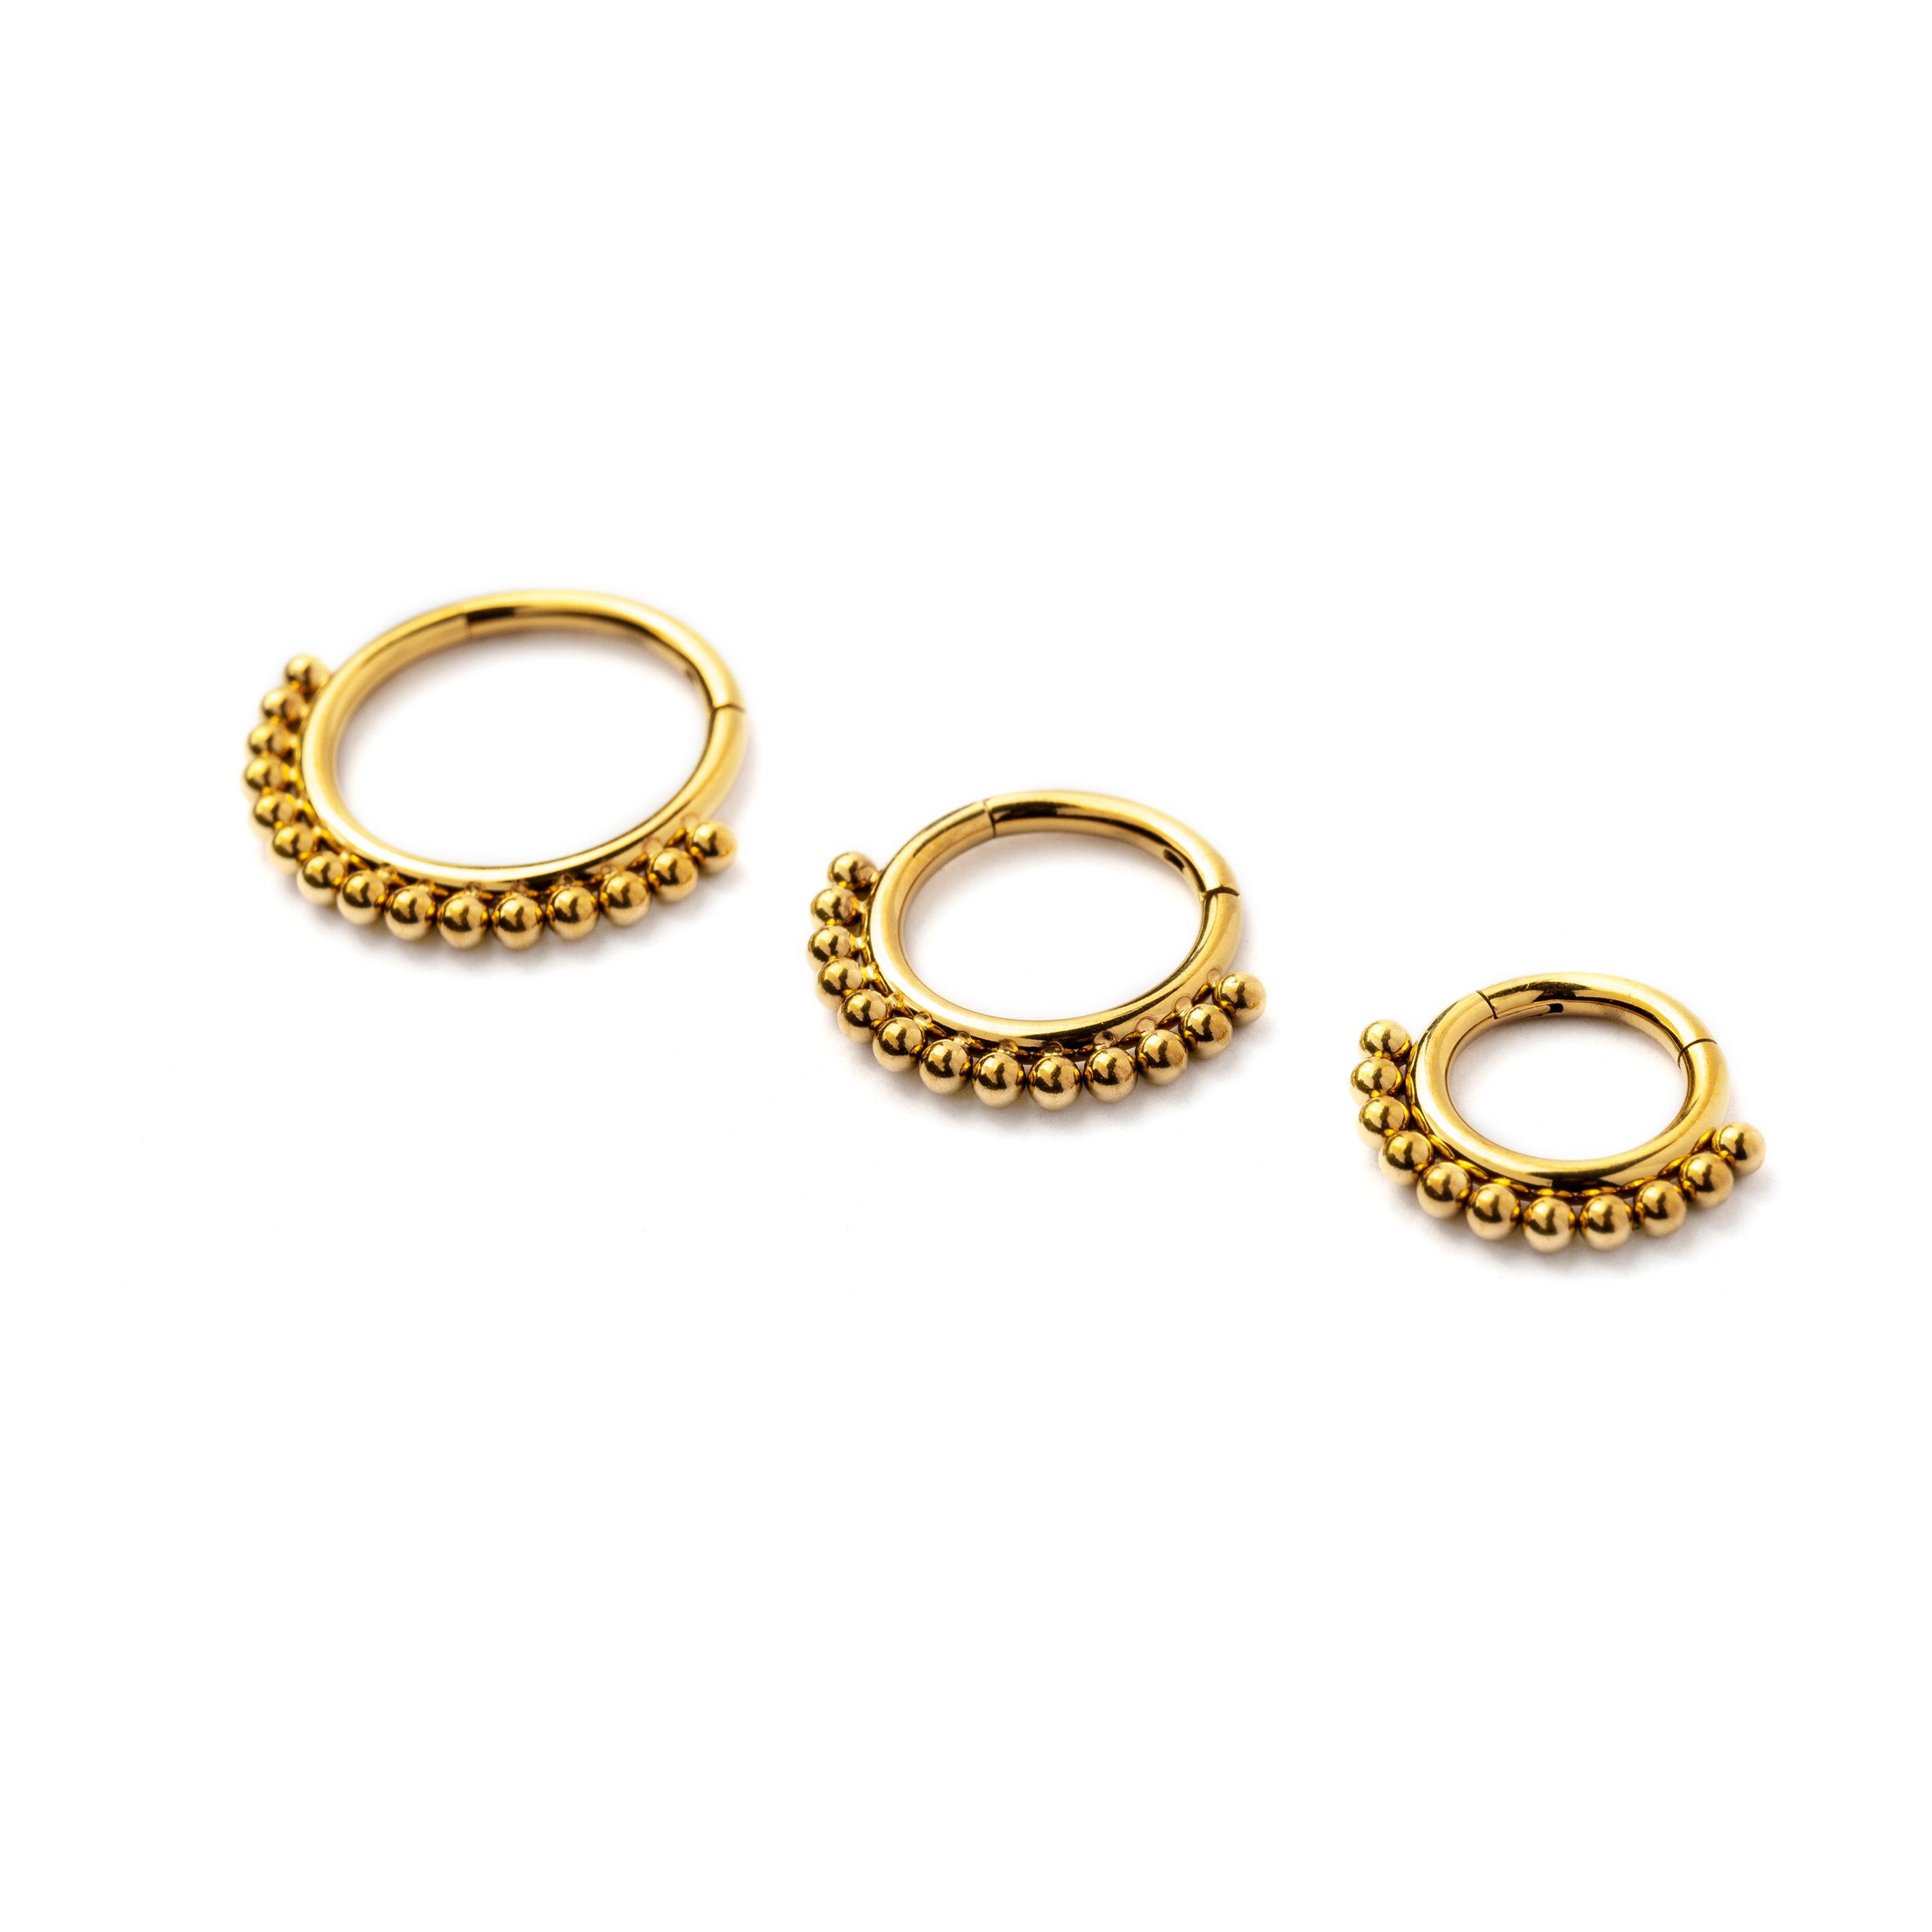 6mm, 8mm, 10mm Liya Gold surgical steel septum clicker rings side view